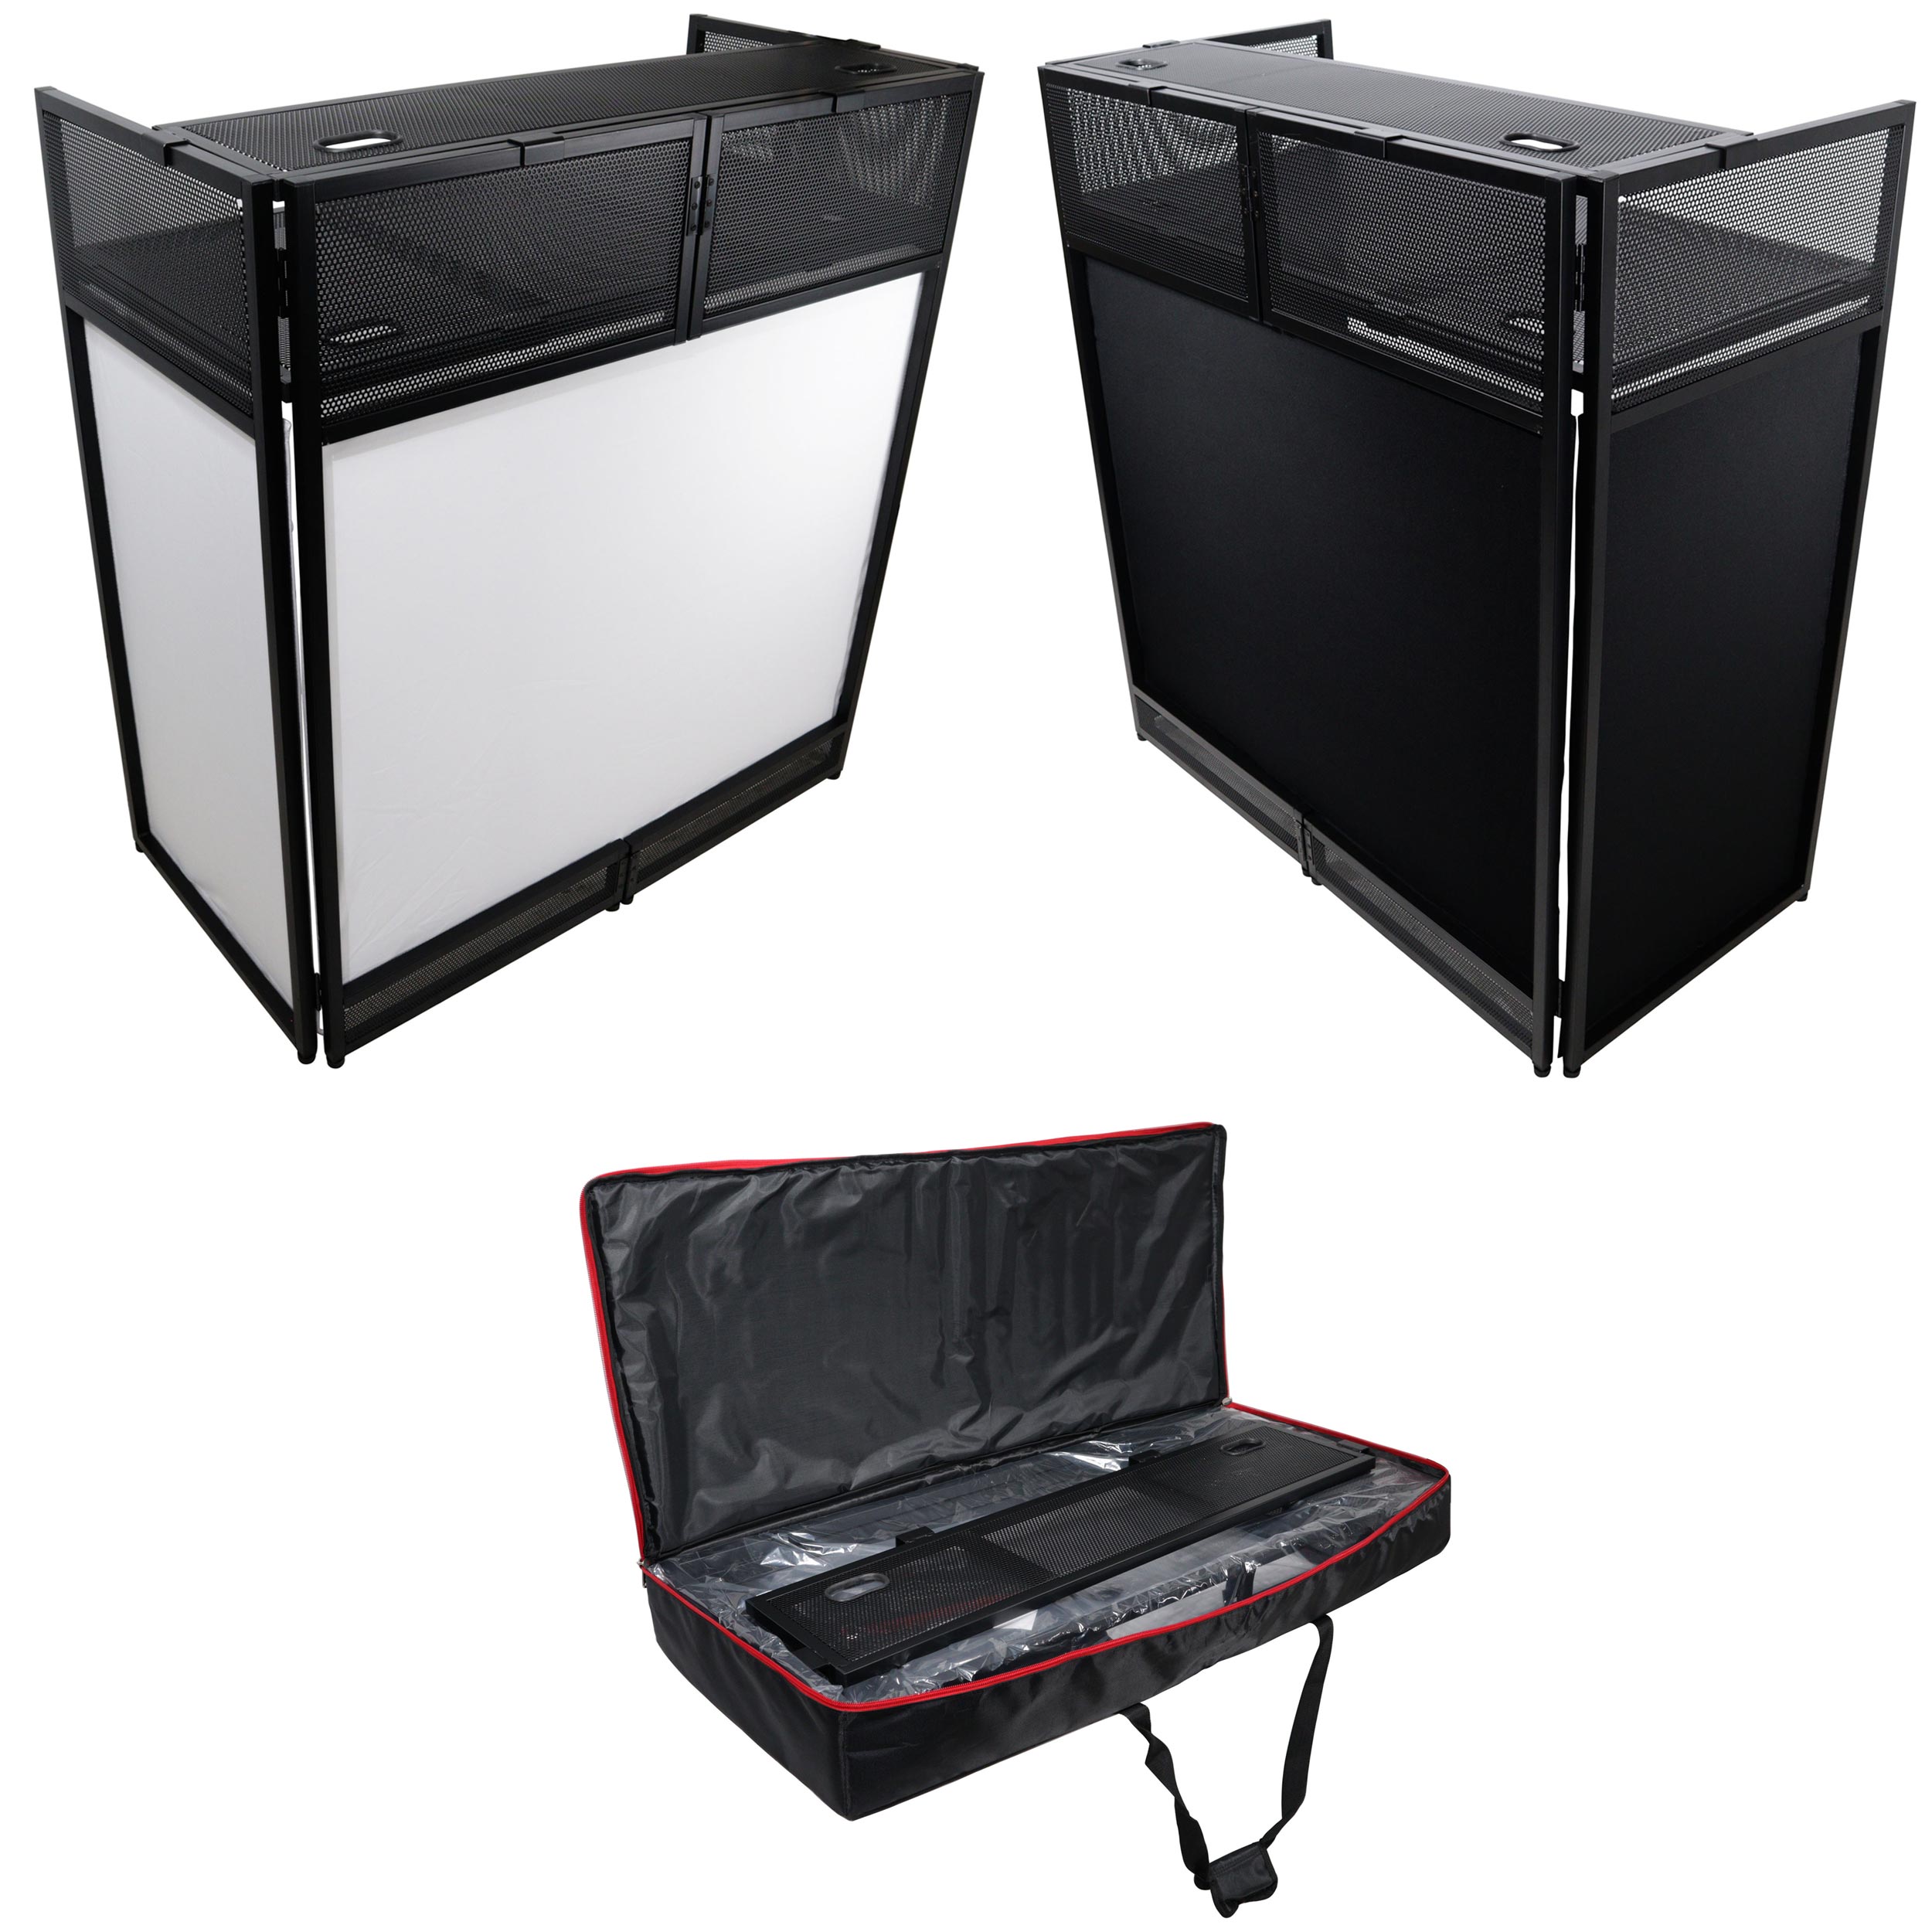 Prox XF-VISTA Bl Vista DJ Booth Facade Table Station with White/Black Scrim Kit and Padded Travel Bag